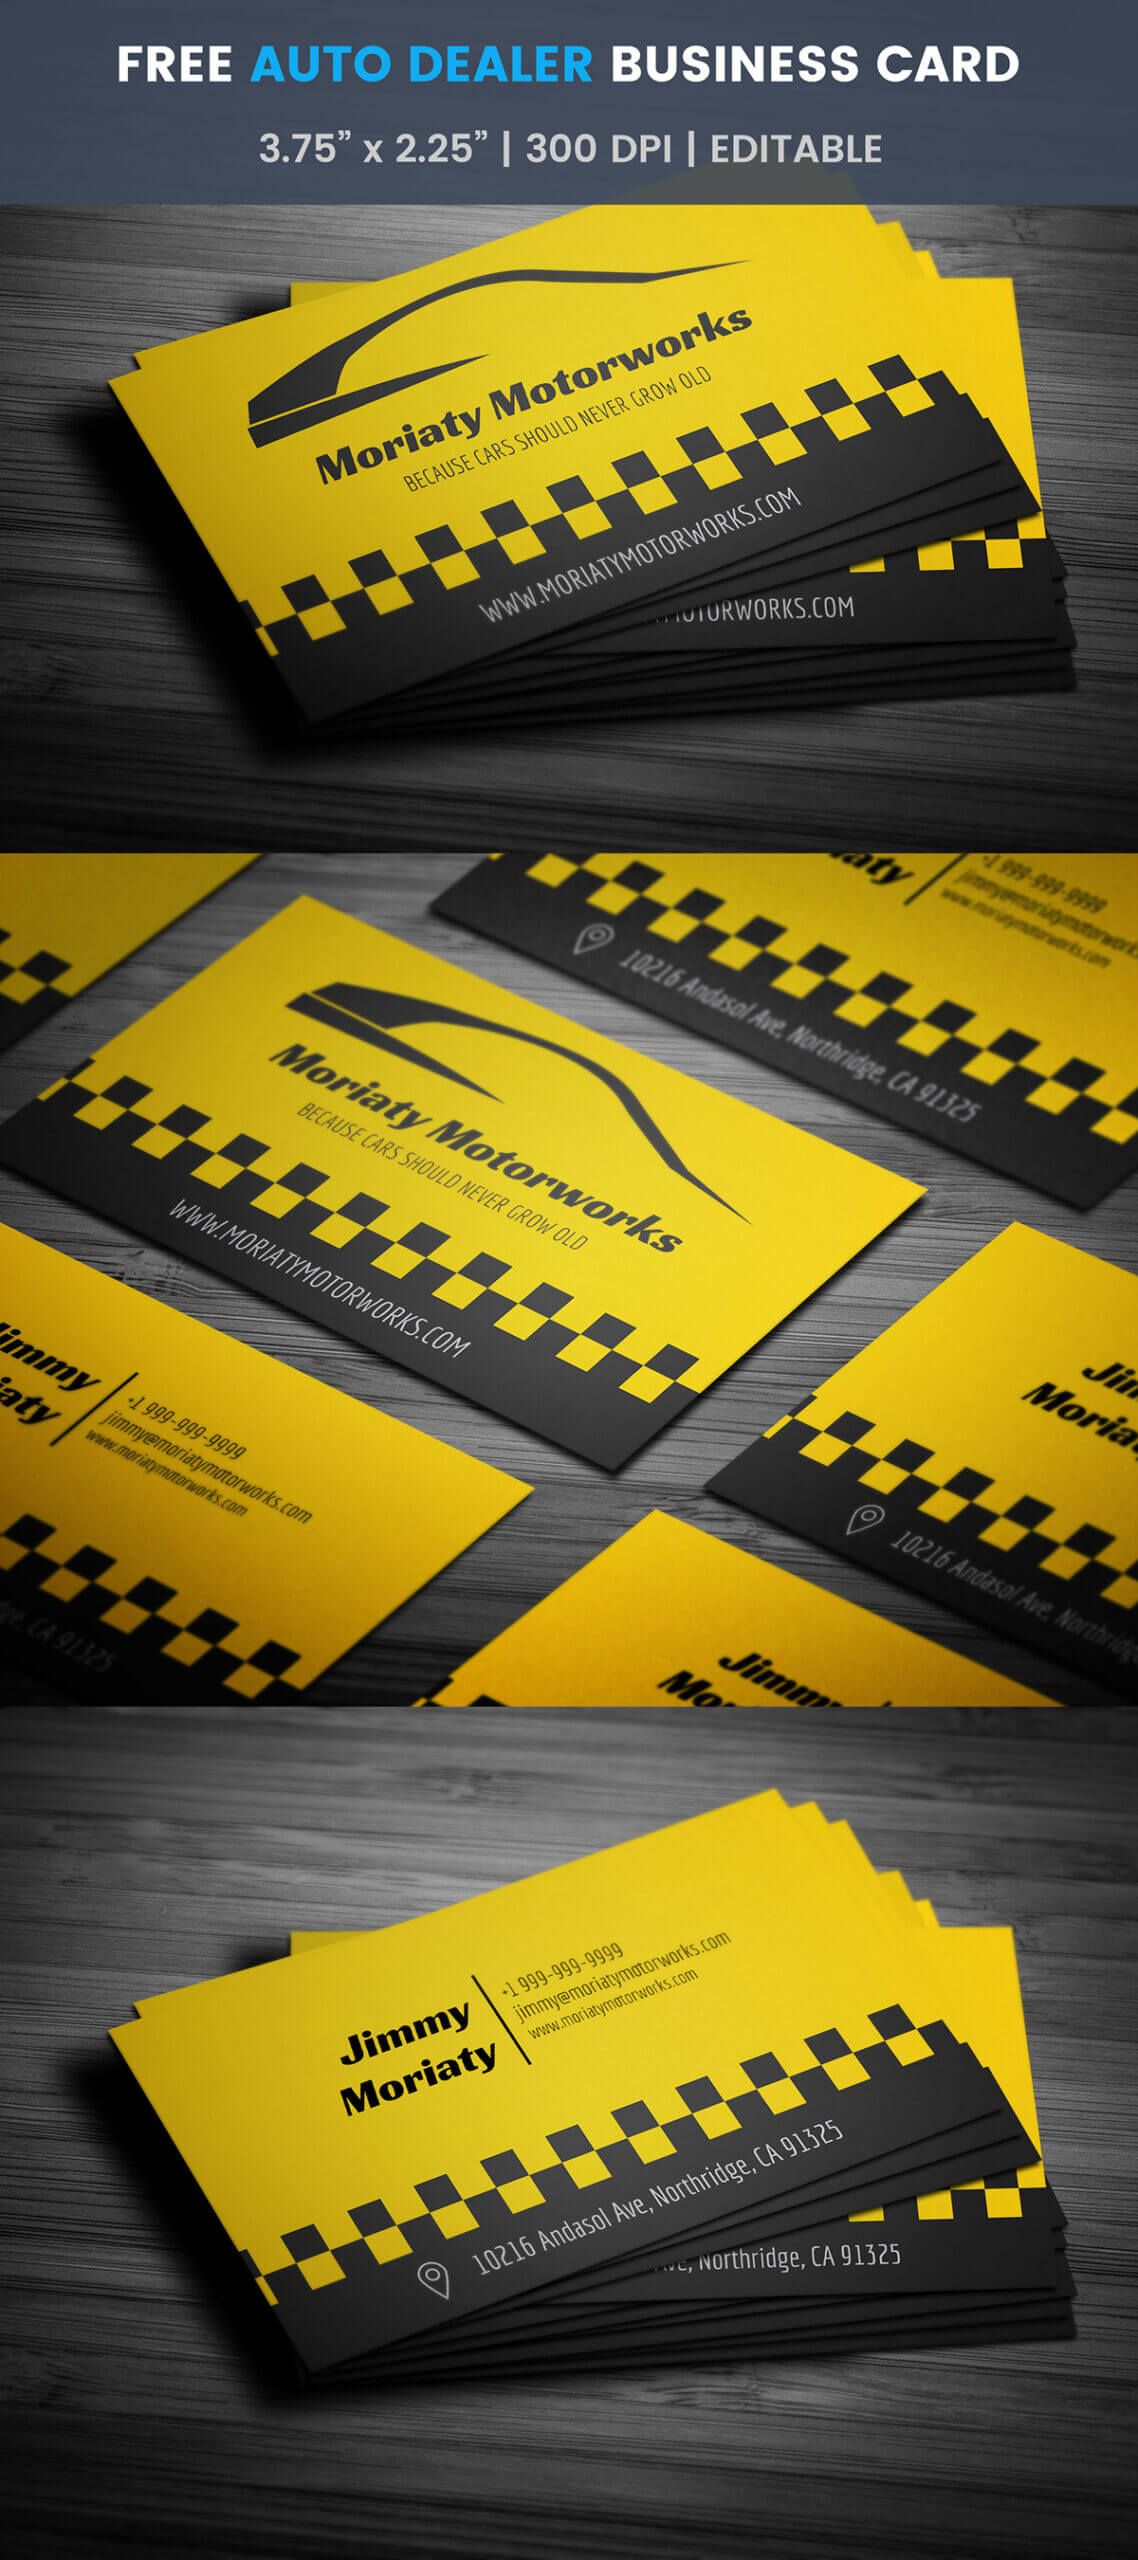 Free Automotive Business Card Template On Student Show For Automotive Business Card Templates